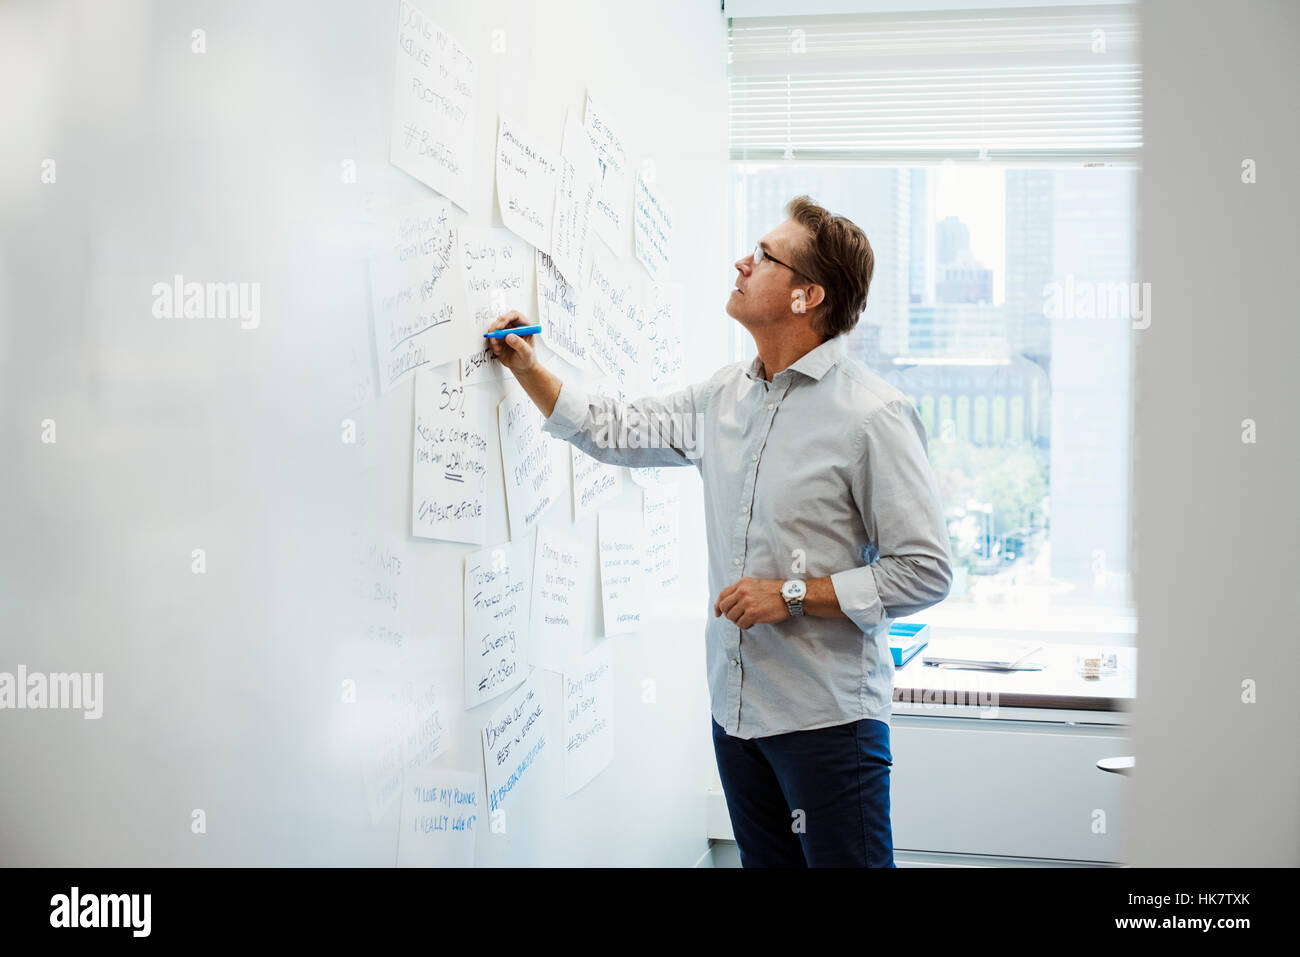 A man standing in an office writing on pieces of paper pinned on a whiteboard. Stock Photo